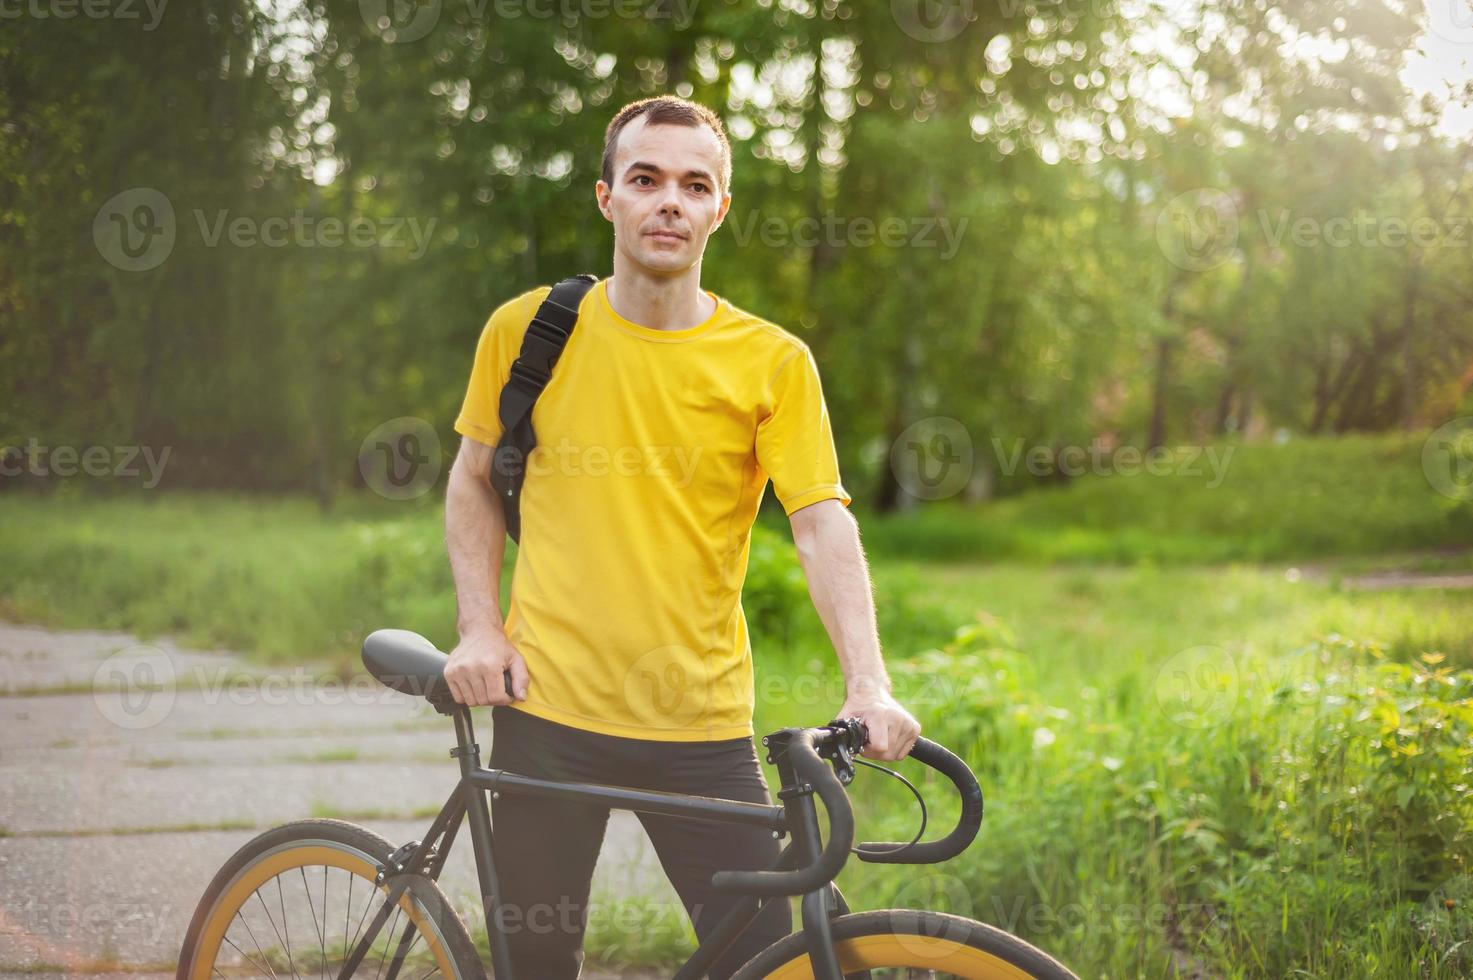 A young Man stopped to rest With his Bicycle in a public Park. photo